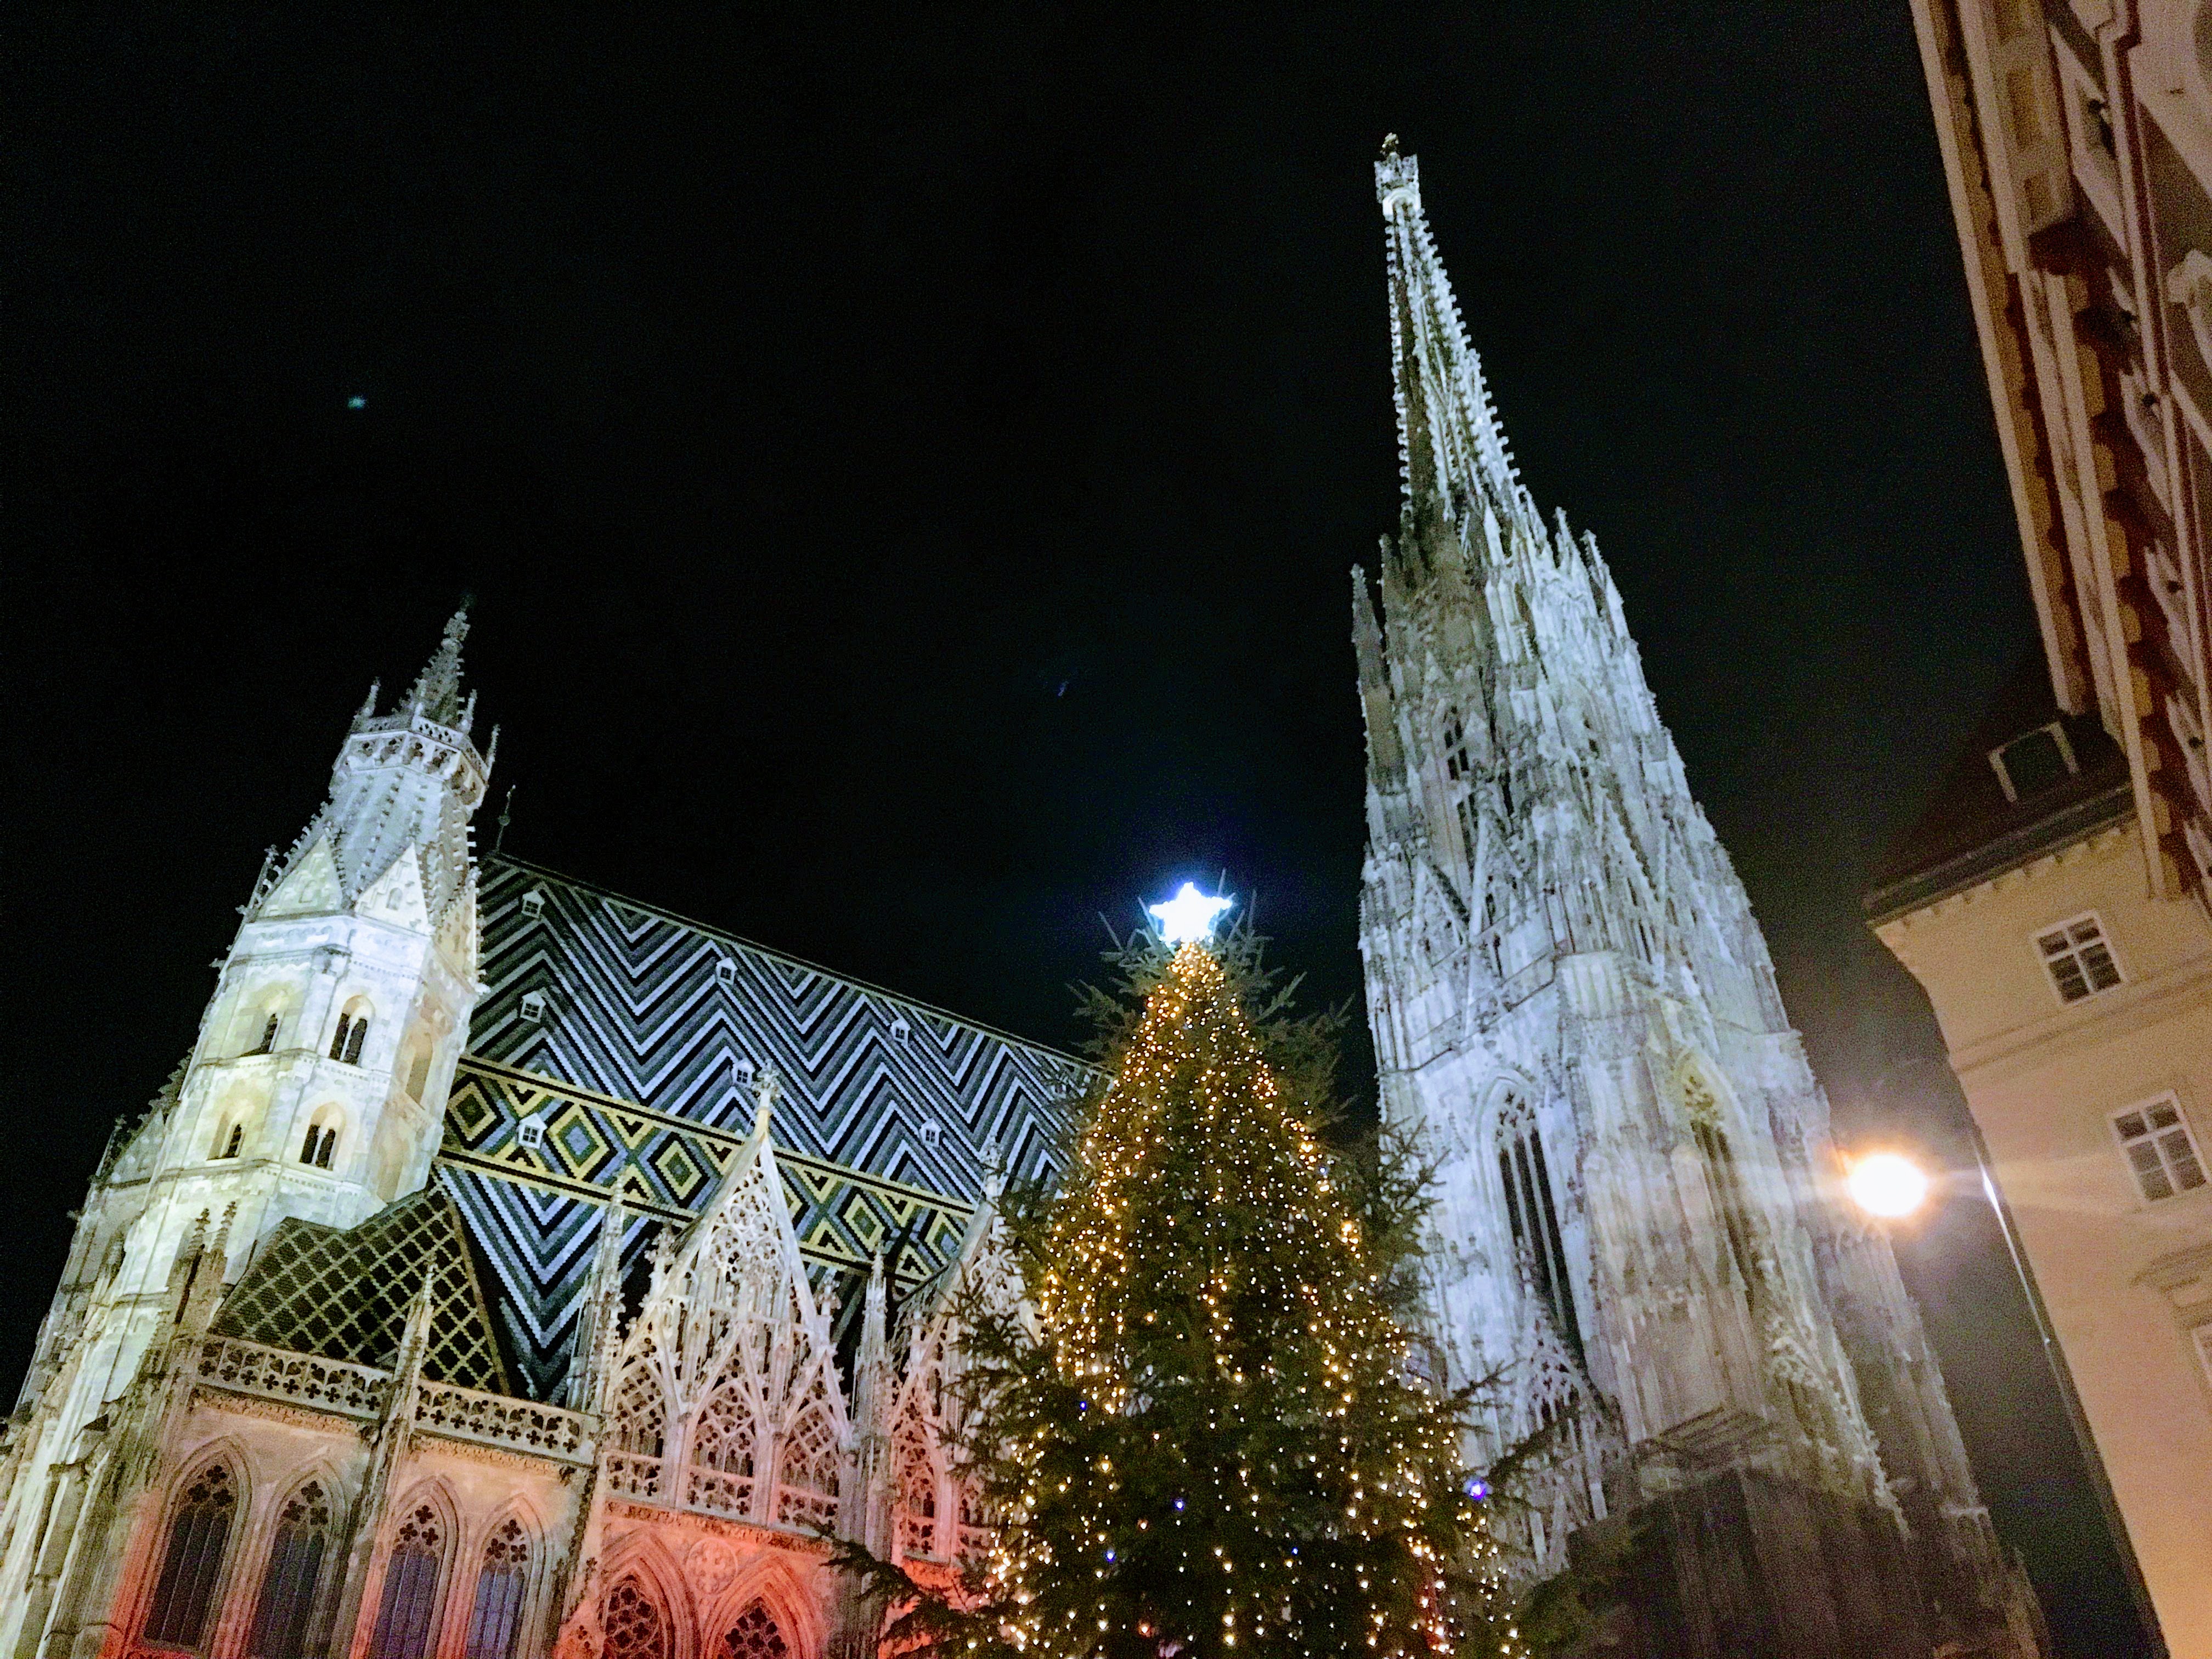 A christmas market at night with the cathedral in the background